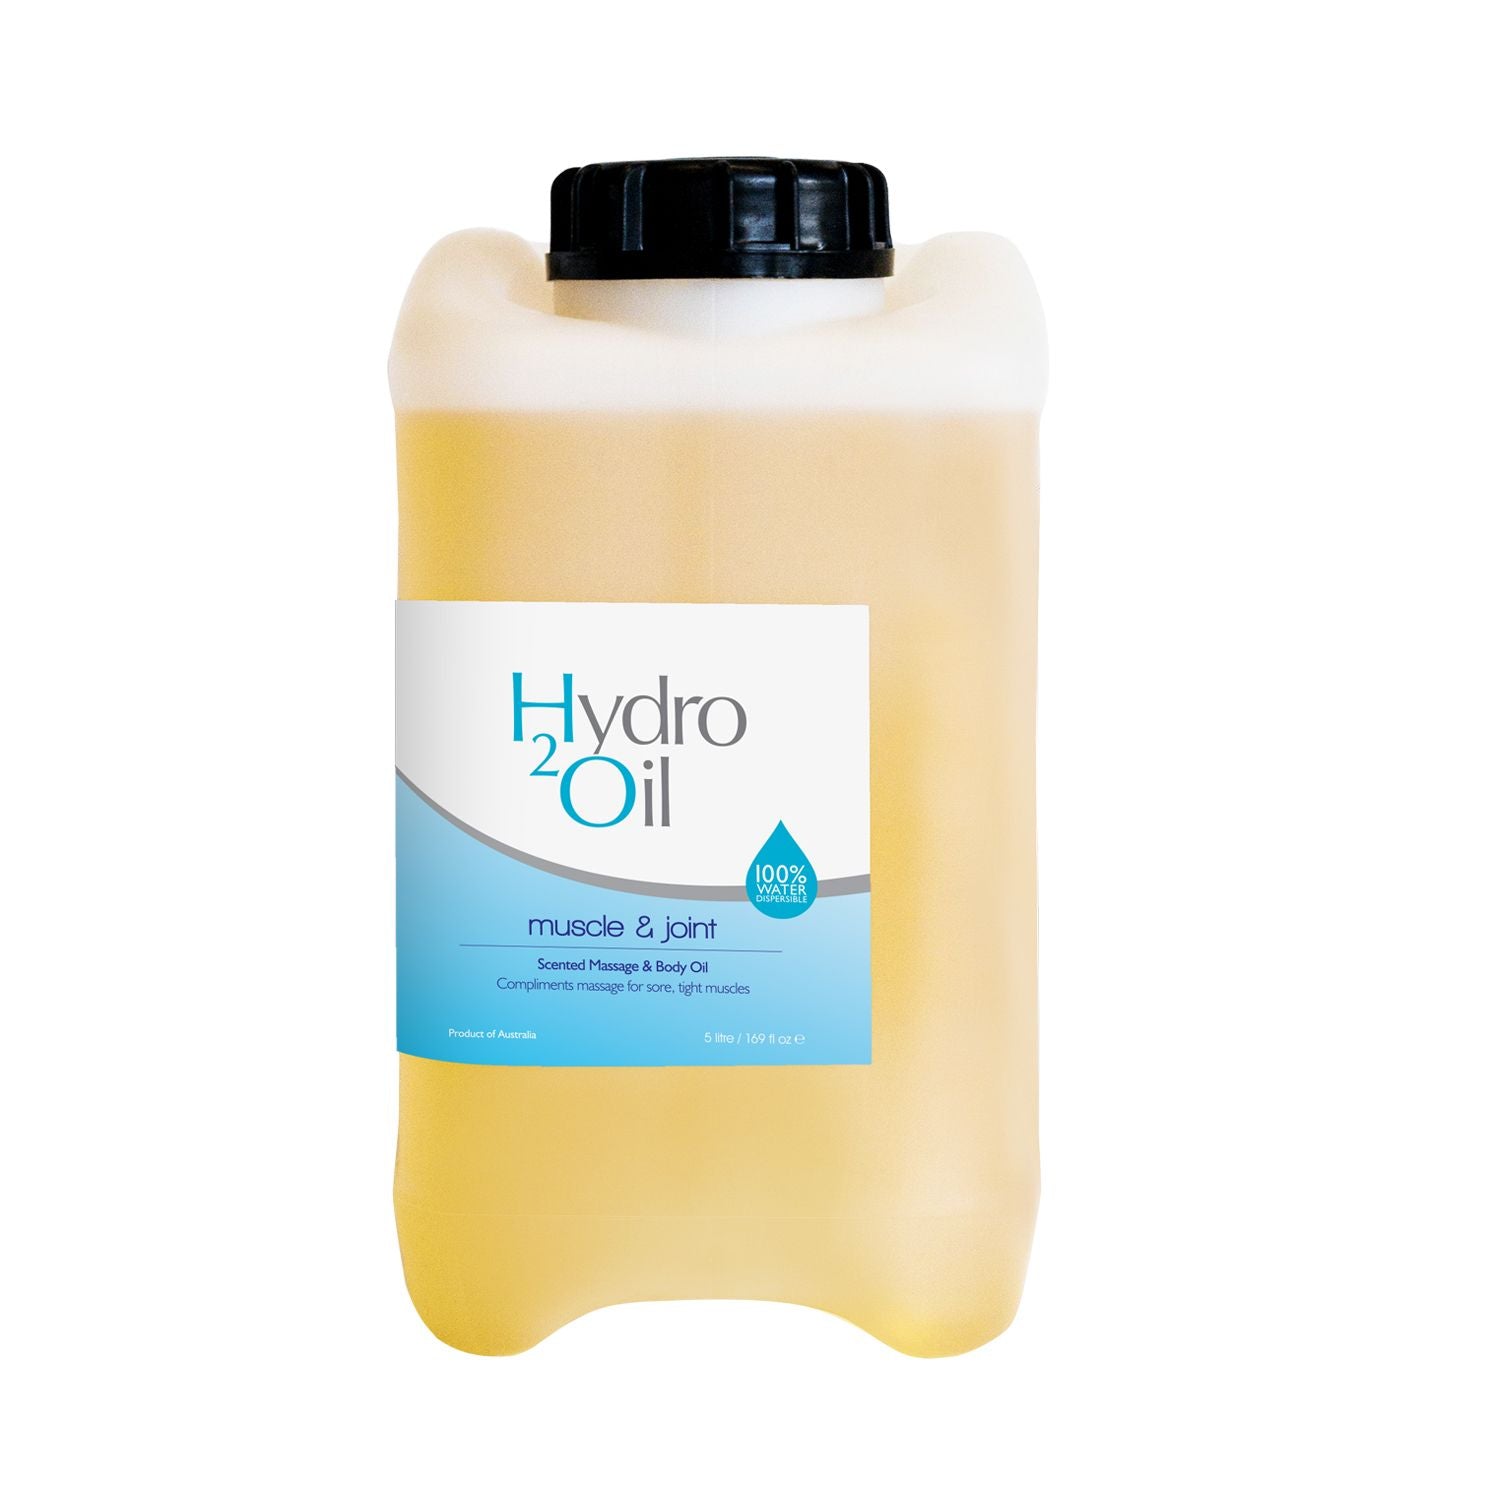 Hydro 2 Oil Muscle & Joint - with pouring tap 5L